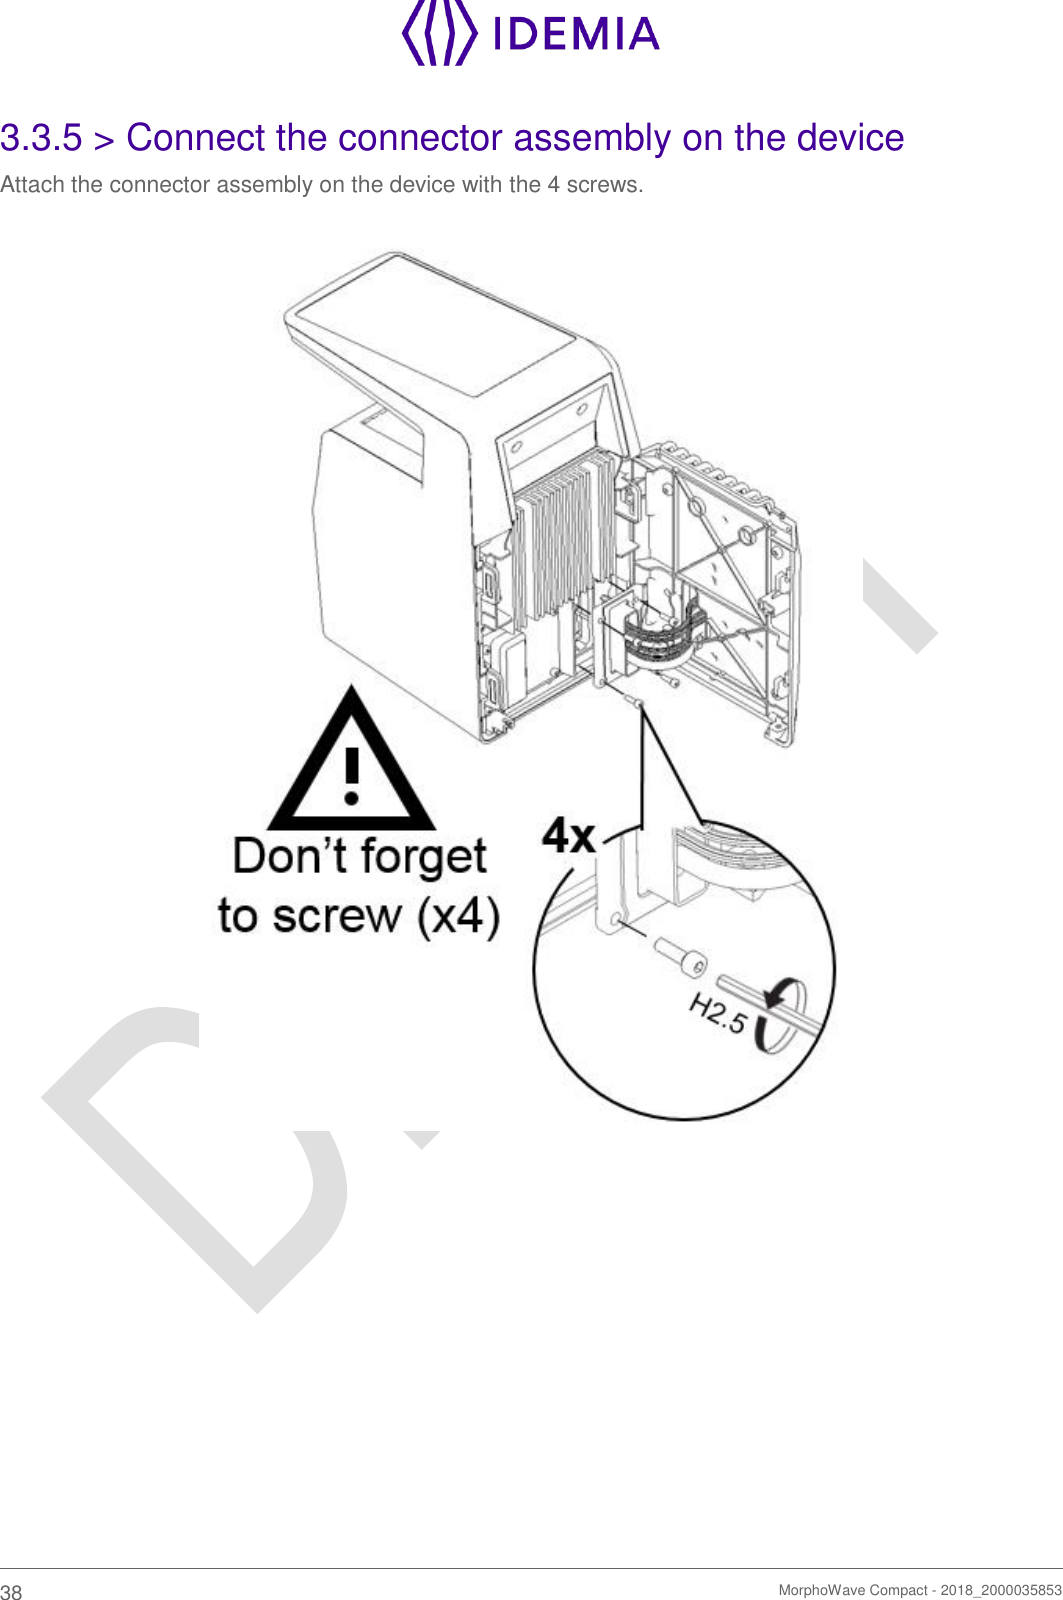    38   MorphoWave Compact - 2018_2000035853  3.3.5 &gt; Connect the connector assembly on the device Attach the connector assembly on the device with the 4 screws.        